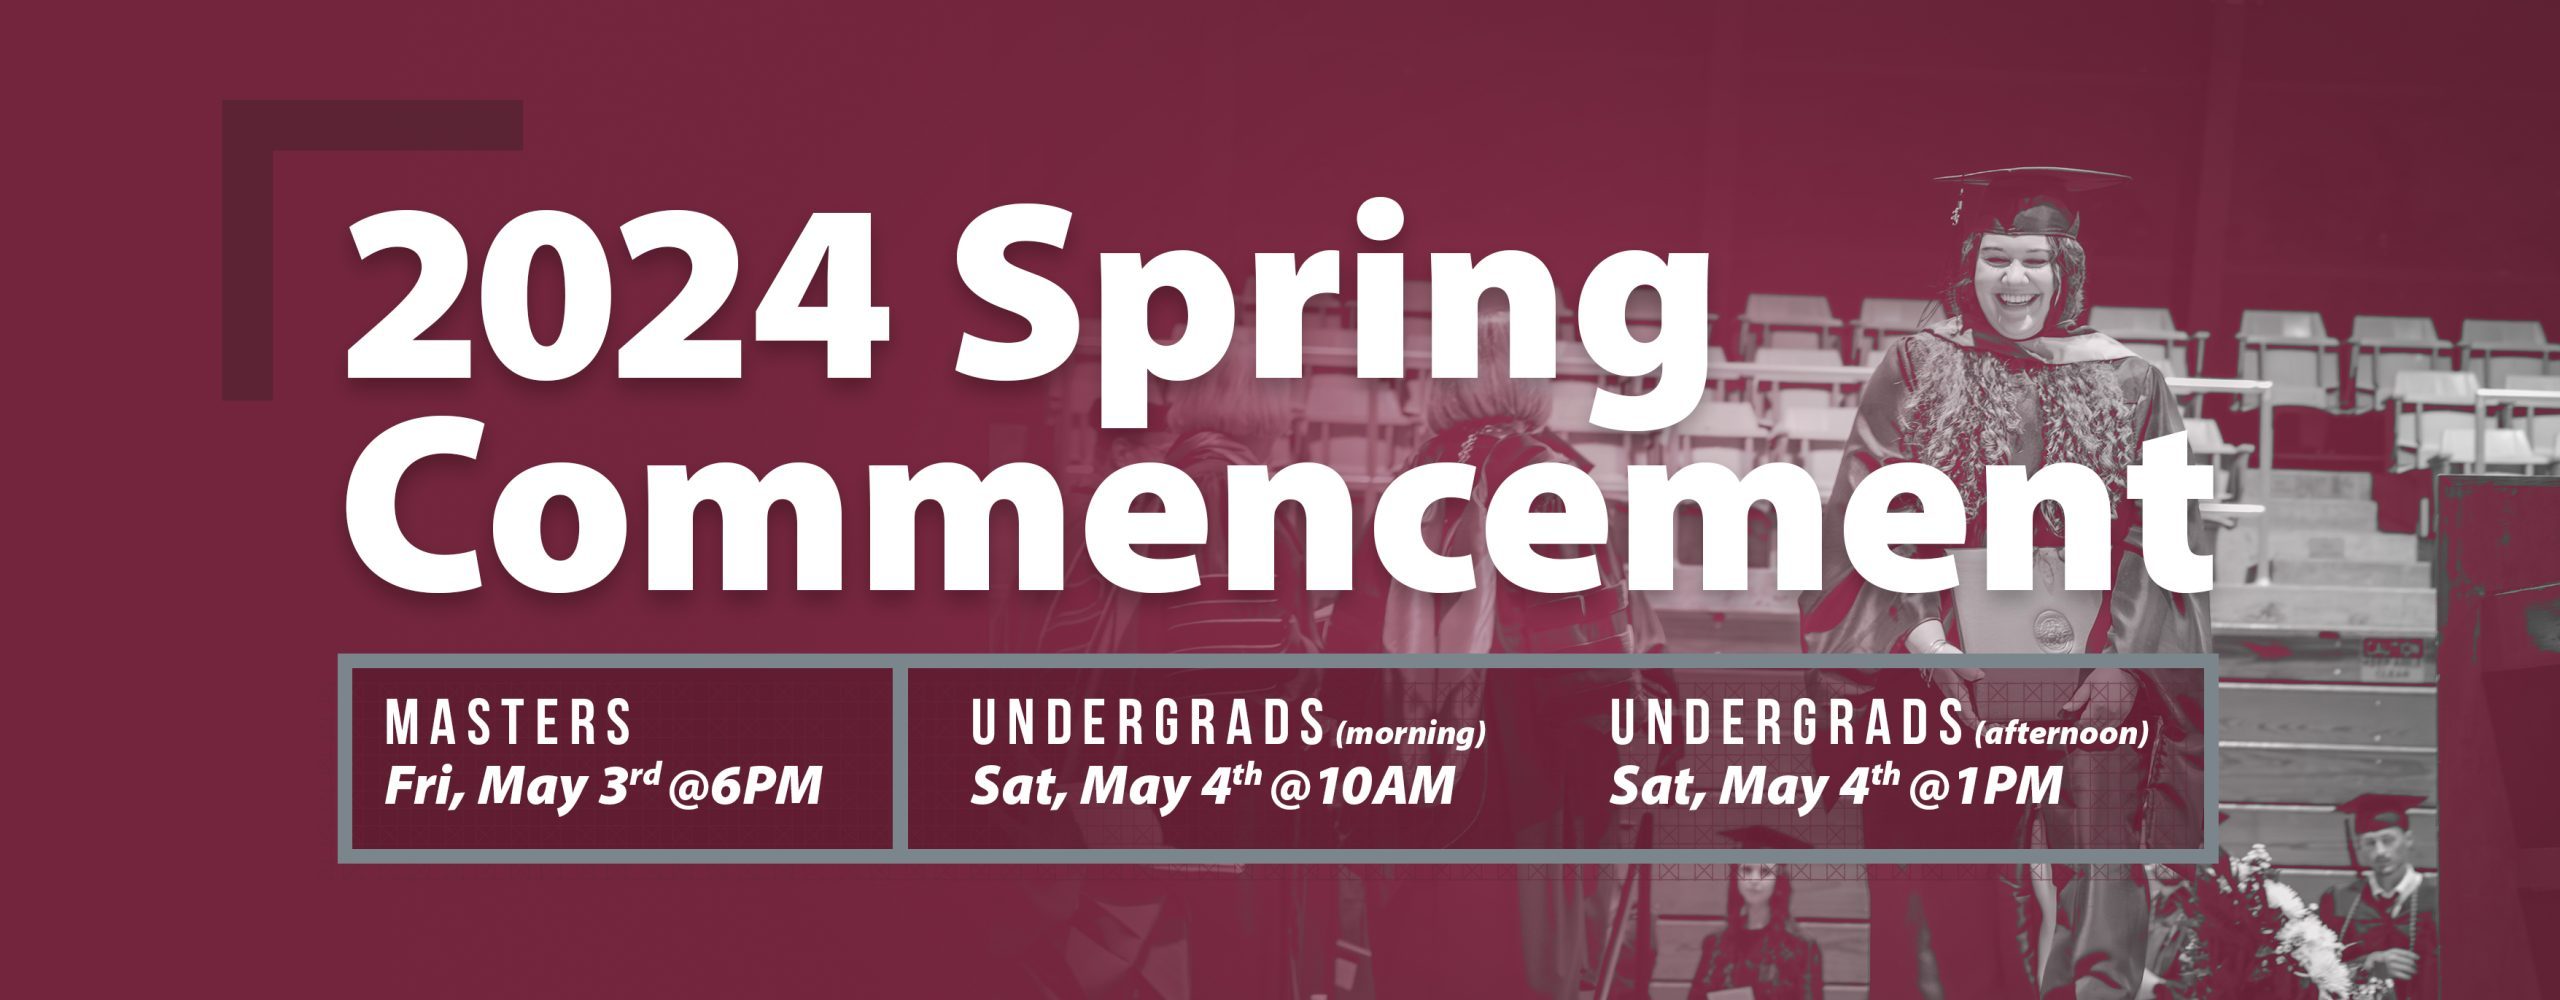 Concord University's 2024 Spring Commencement Schedules is Masters Ceremony on Friday, May 3 at 6 pm ; Undergraduate Morning Ceremony on Saturday, May 4 at 10 am ; Undergraduate Afternoon Ceremony on Saturday, May 4 at 1 pm